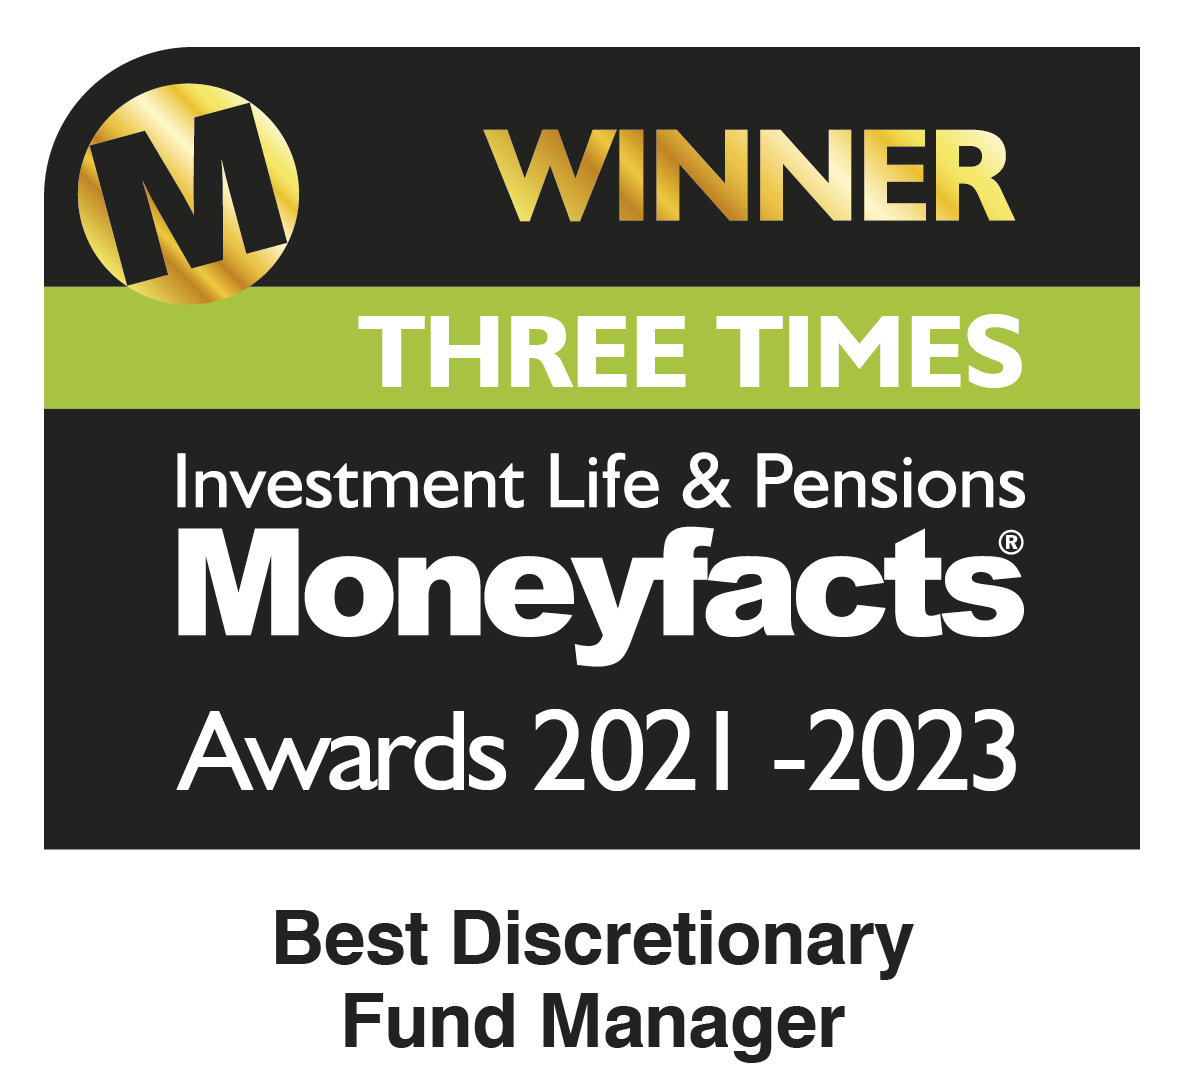 Moneyfacts award 2021-2023 for Best Discretionary Fund Manager